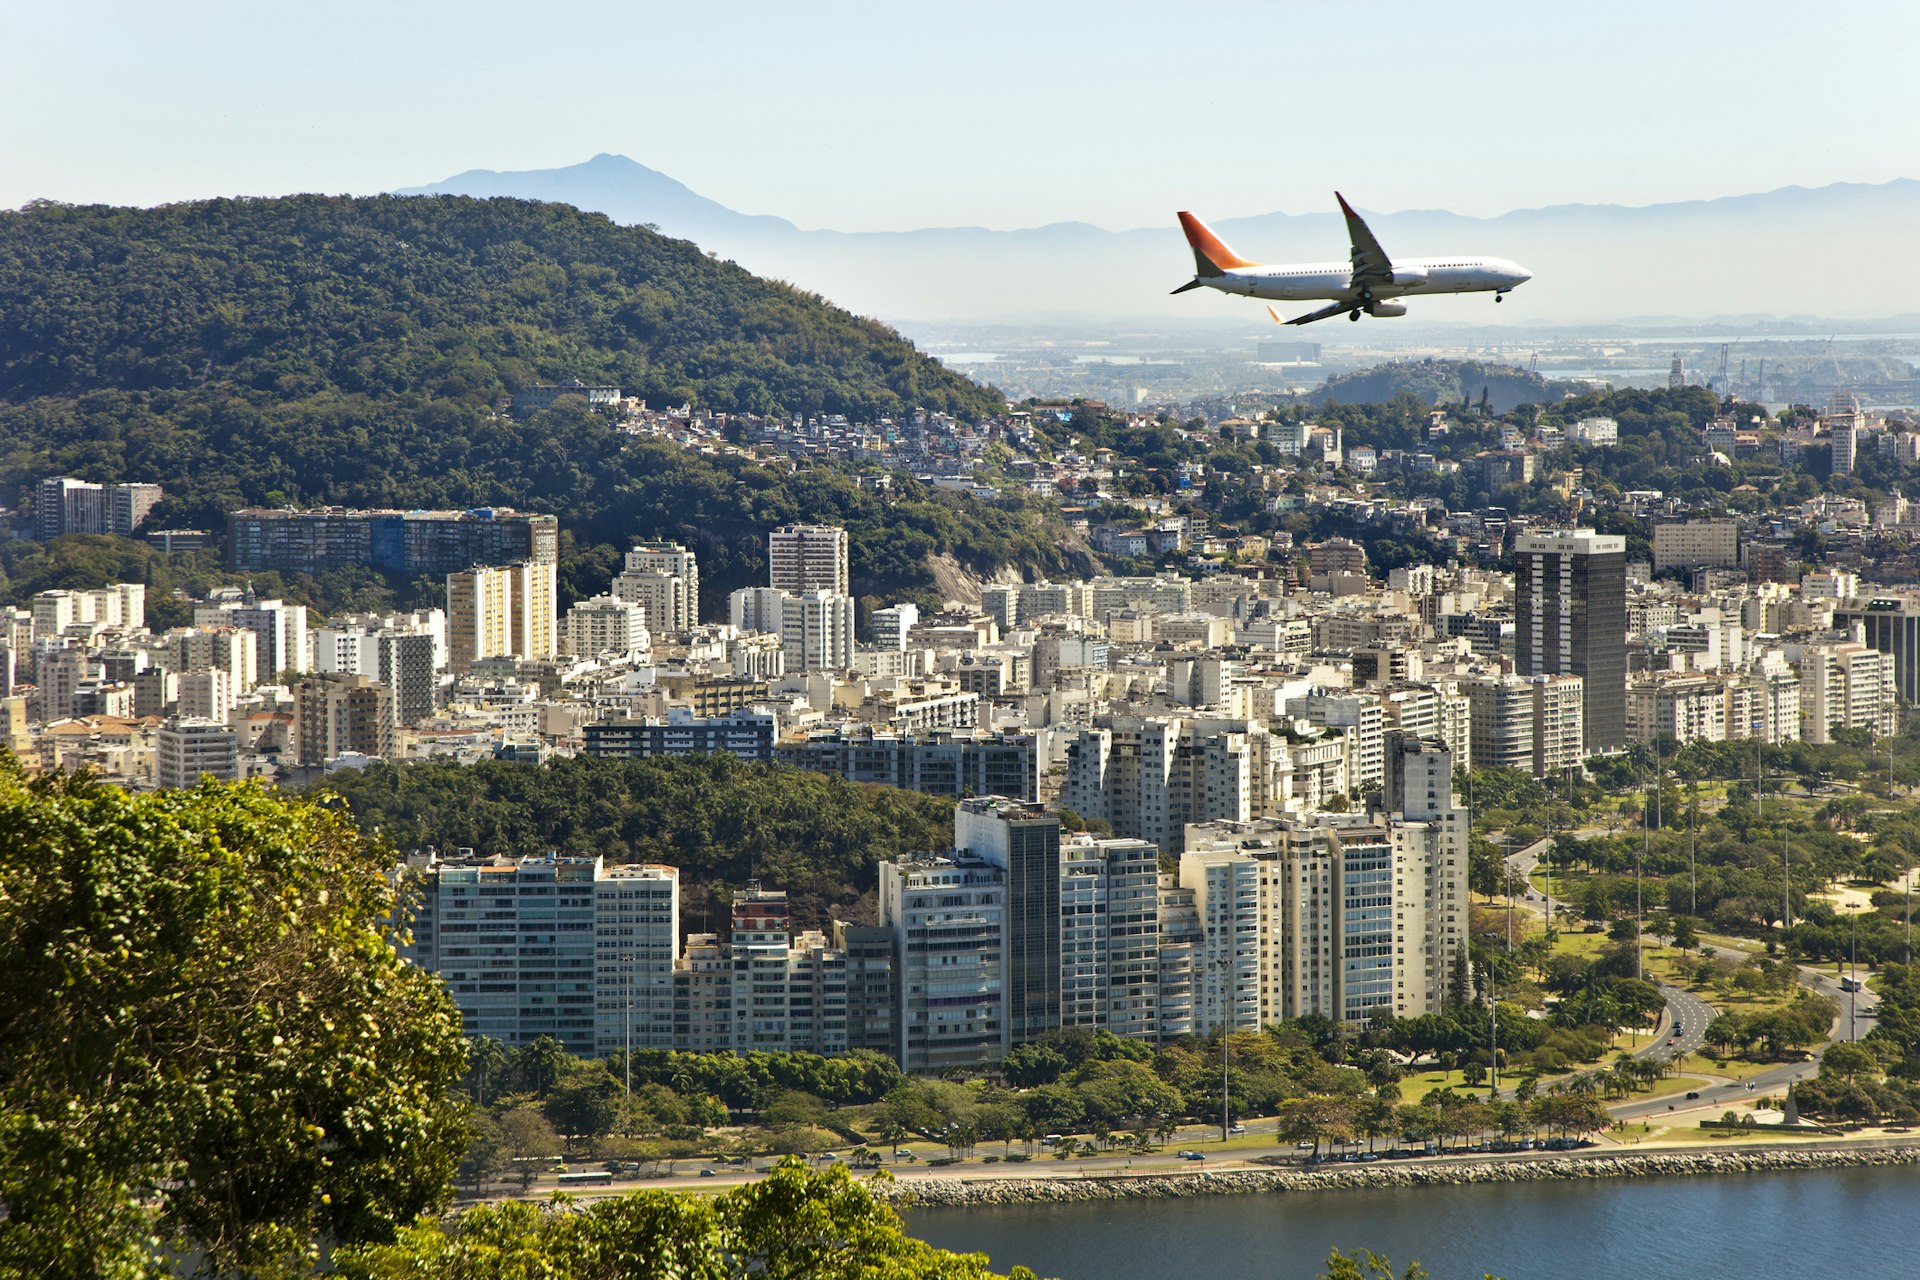 A commercial jet flies over a built-up city by the sea 